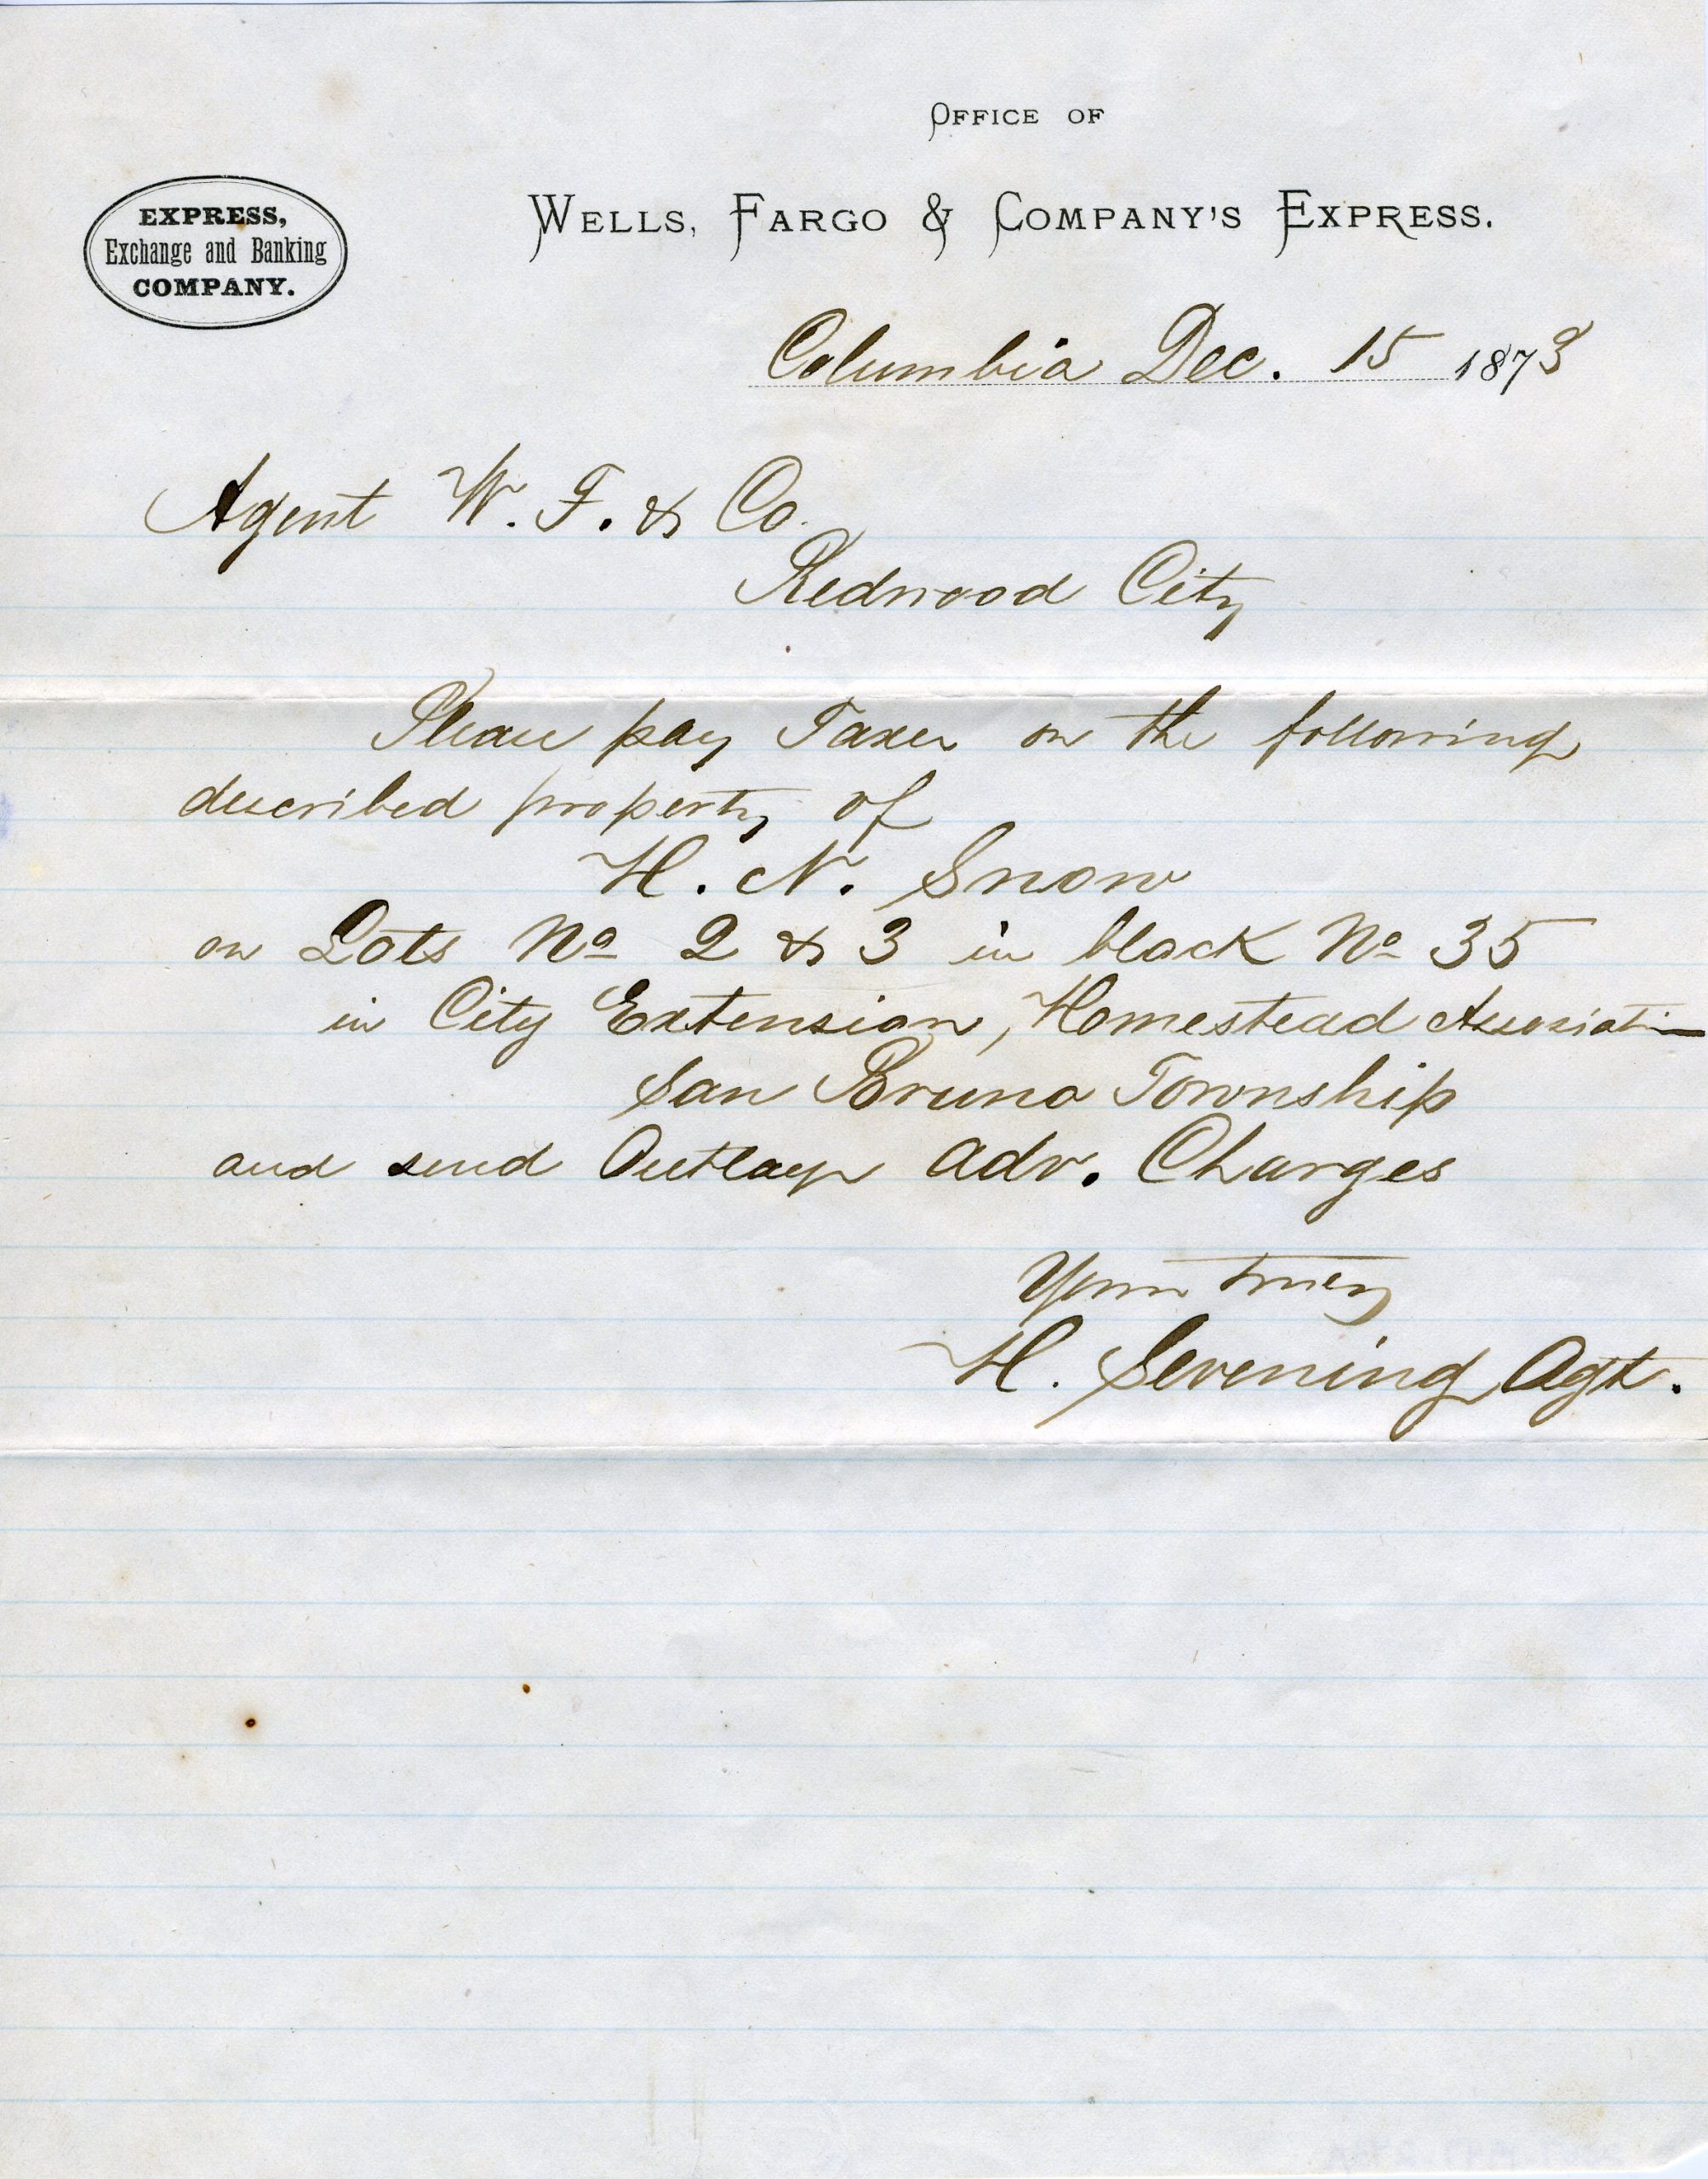 A lined paper with Wells Fargo & Company’s Express says: Columbia Dec. 15 1873. Agent W.F. & Co. Redwood City. Please pay taxes on the following described property of H.N. Snow on Lots No 2 & 3 in block No 35 in City Extension, Homestead Association San Bruno Township and send Outlay Adv. Charges. Yours Truly, H. Sevening Agt.